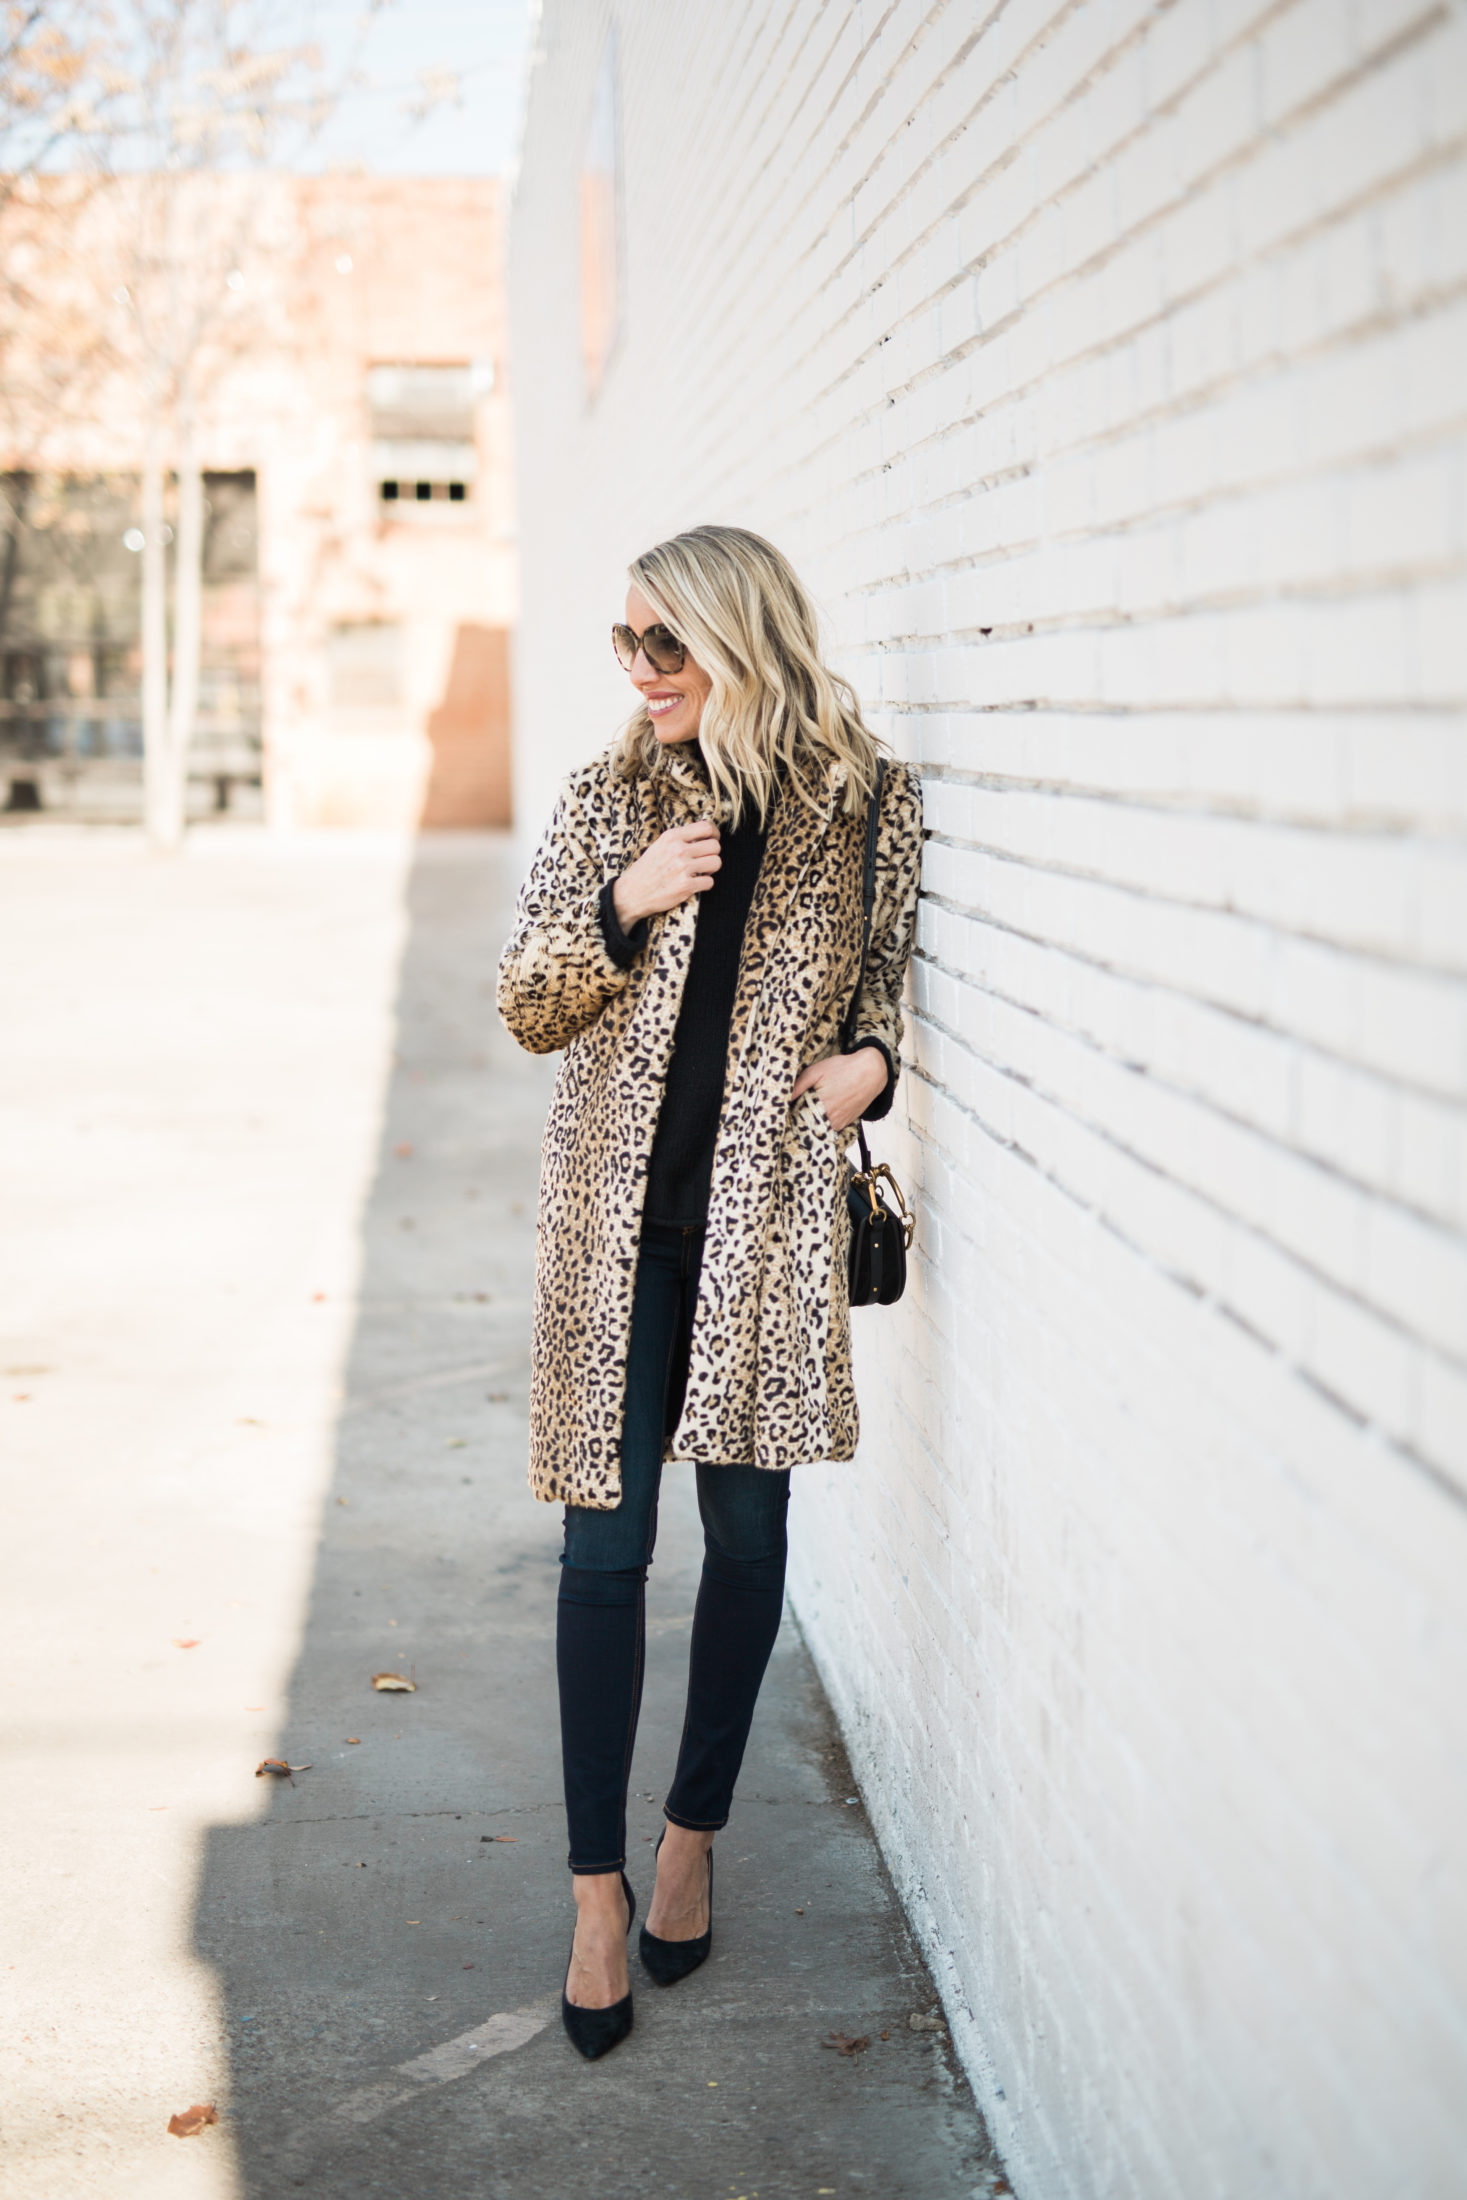 affordable faux fur coats for winter that look high end